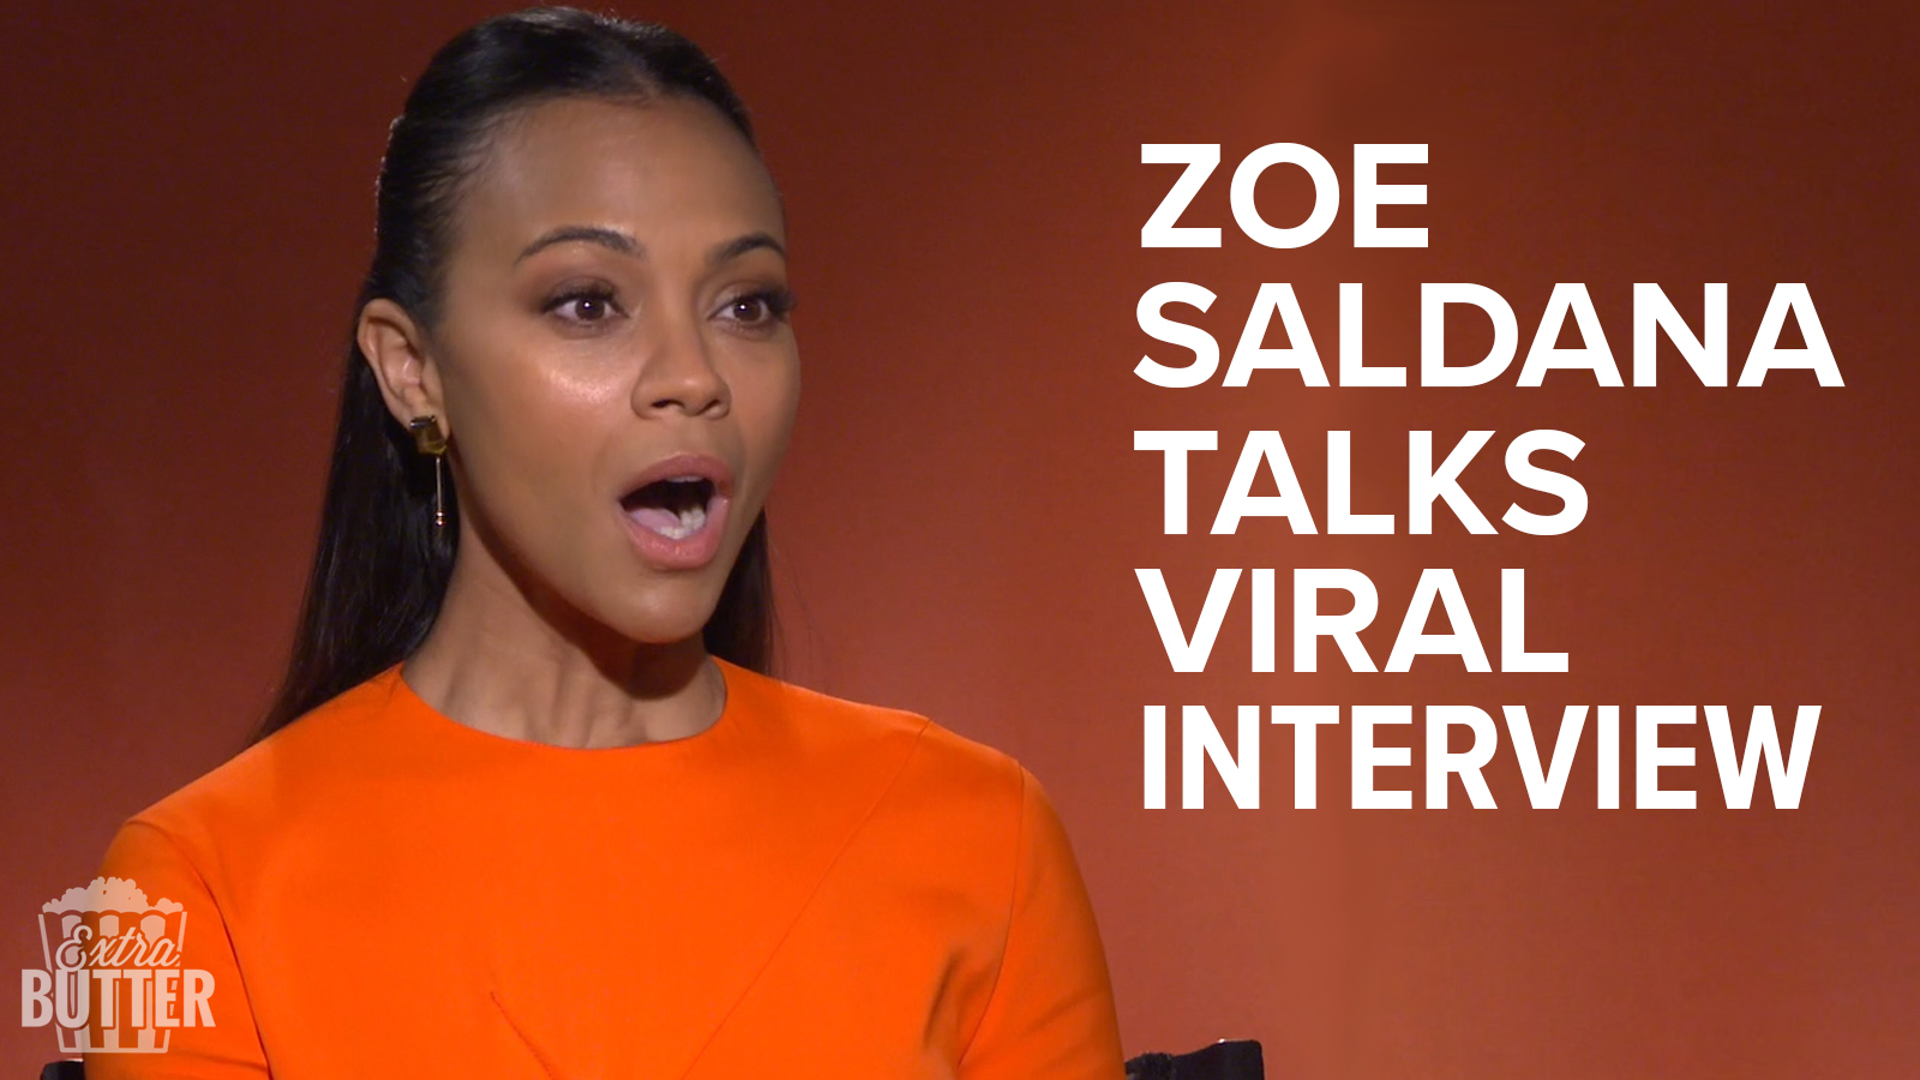 Zoe Saldana looks back with Mark S. Allen to an old interview they did where she painted his fingernails. Zoe also talks about how the movie 'Missing Link' lets her check a weird box of her bucket list. She also reveals that prior to the premiere she had never met her co-star in the movie Zach Galifianakis. Interview arranged by United Artists Releasing.